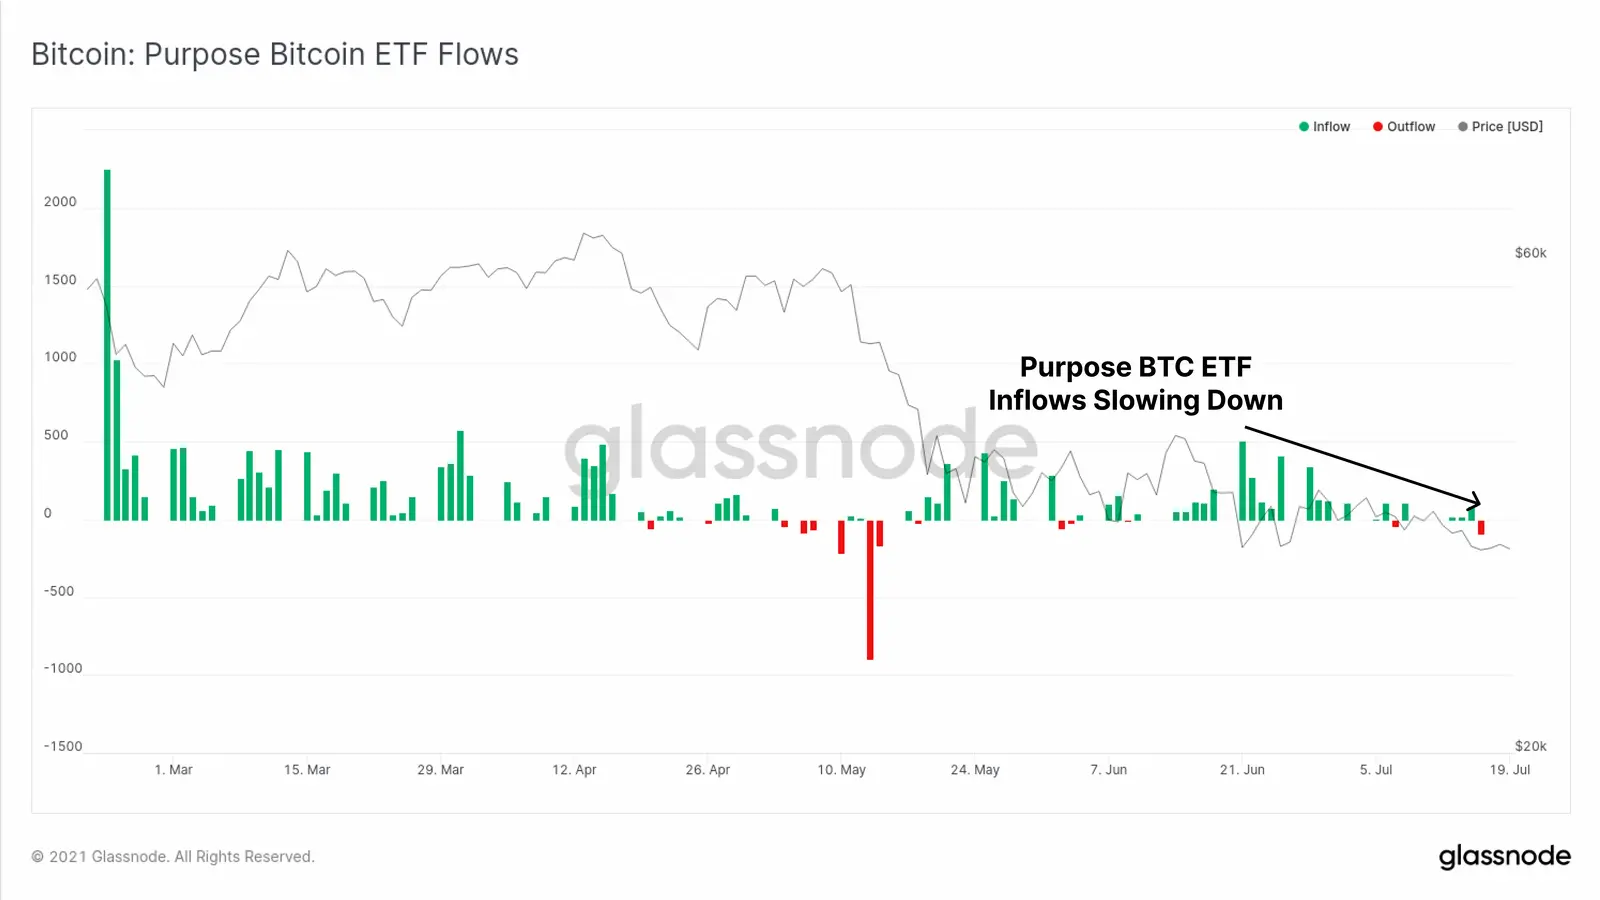 Purpose ETF Outflow